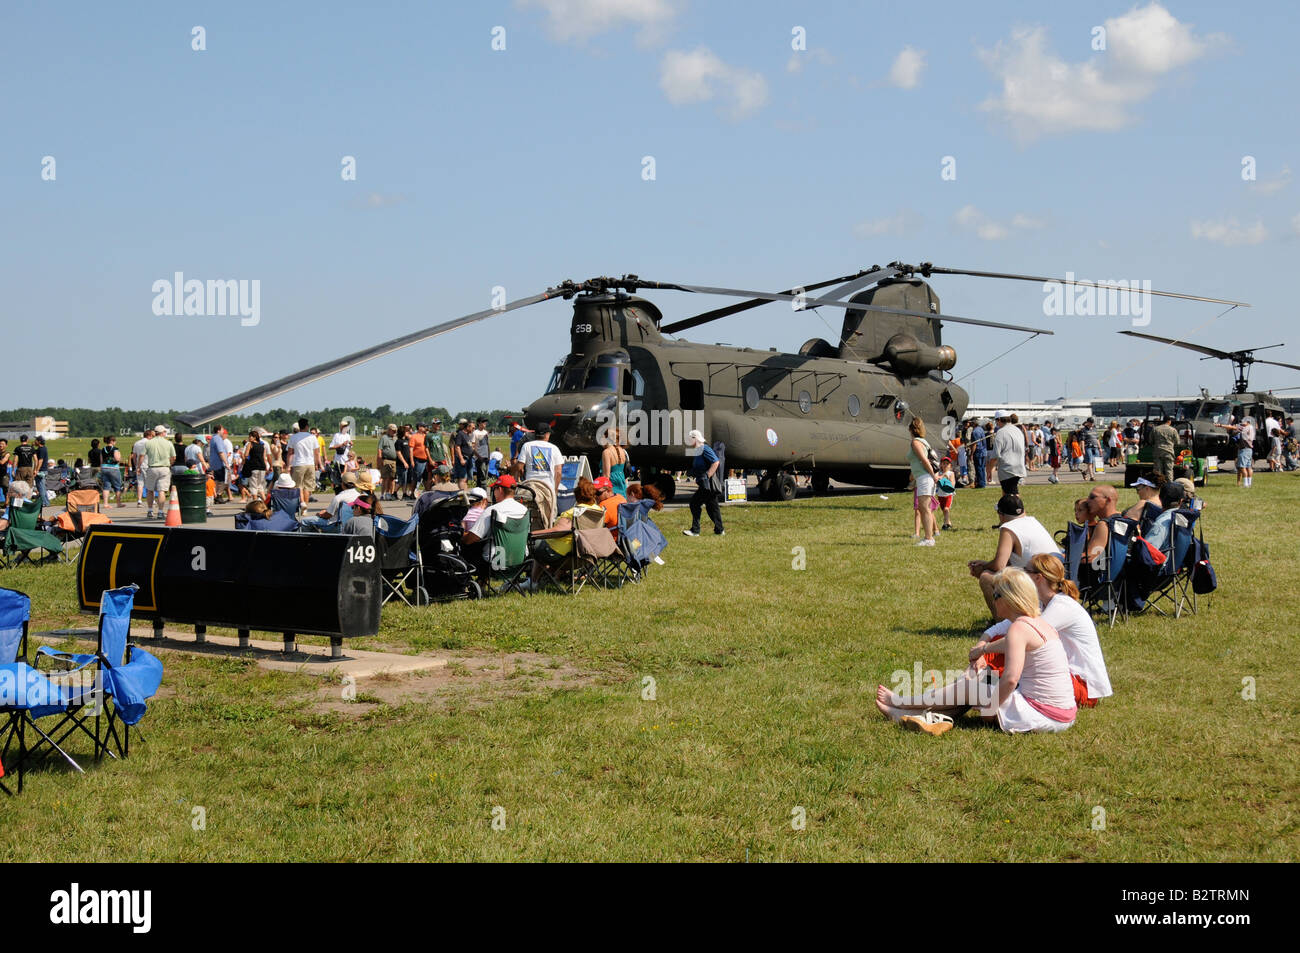 The Boeing CH-47 Chinook helicopter on display at the Rochester NY International Airshow. Stock Photo